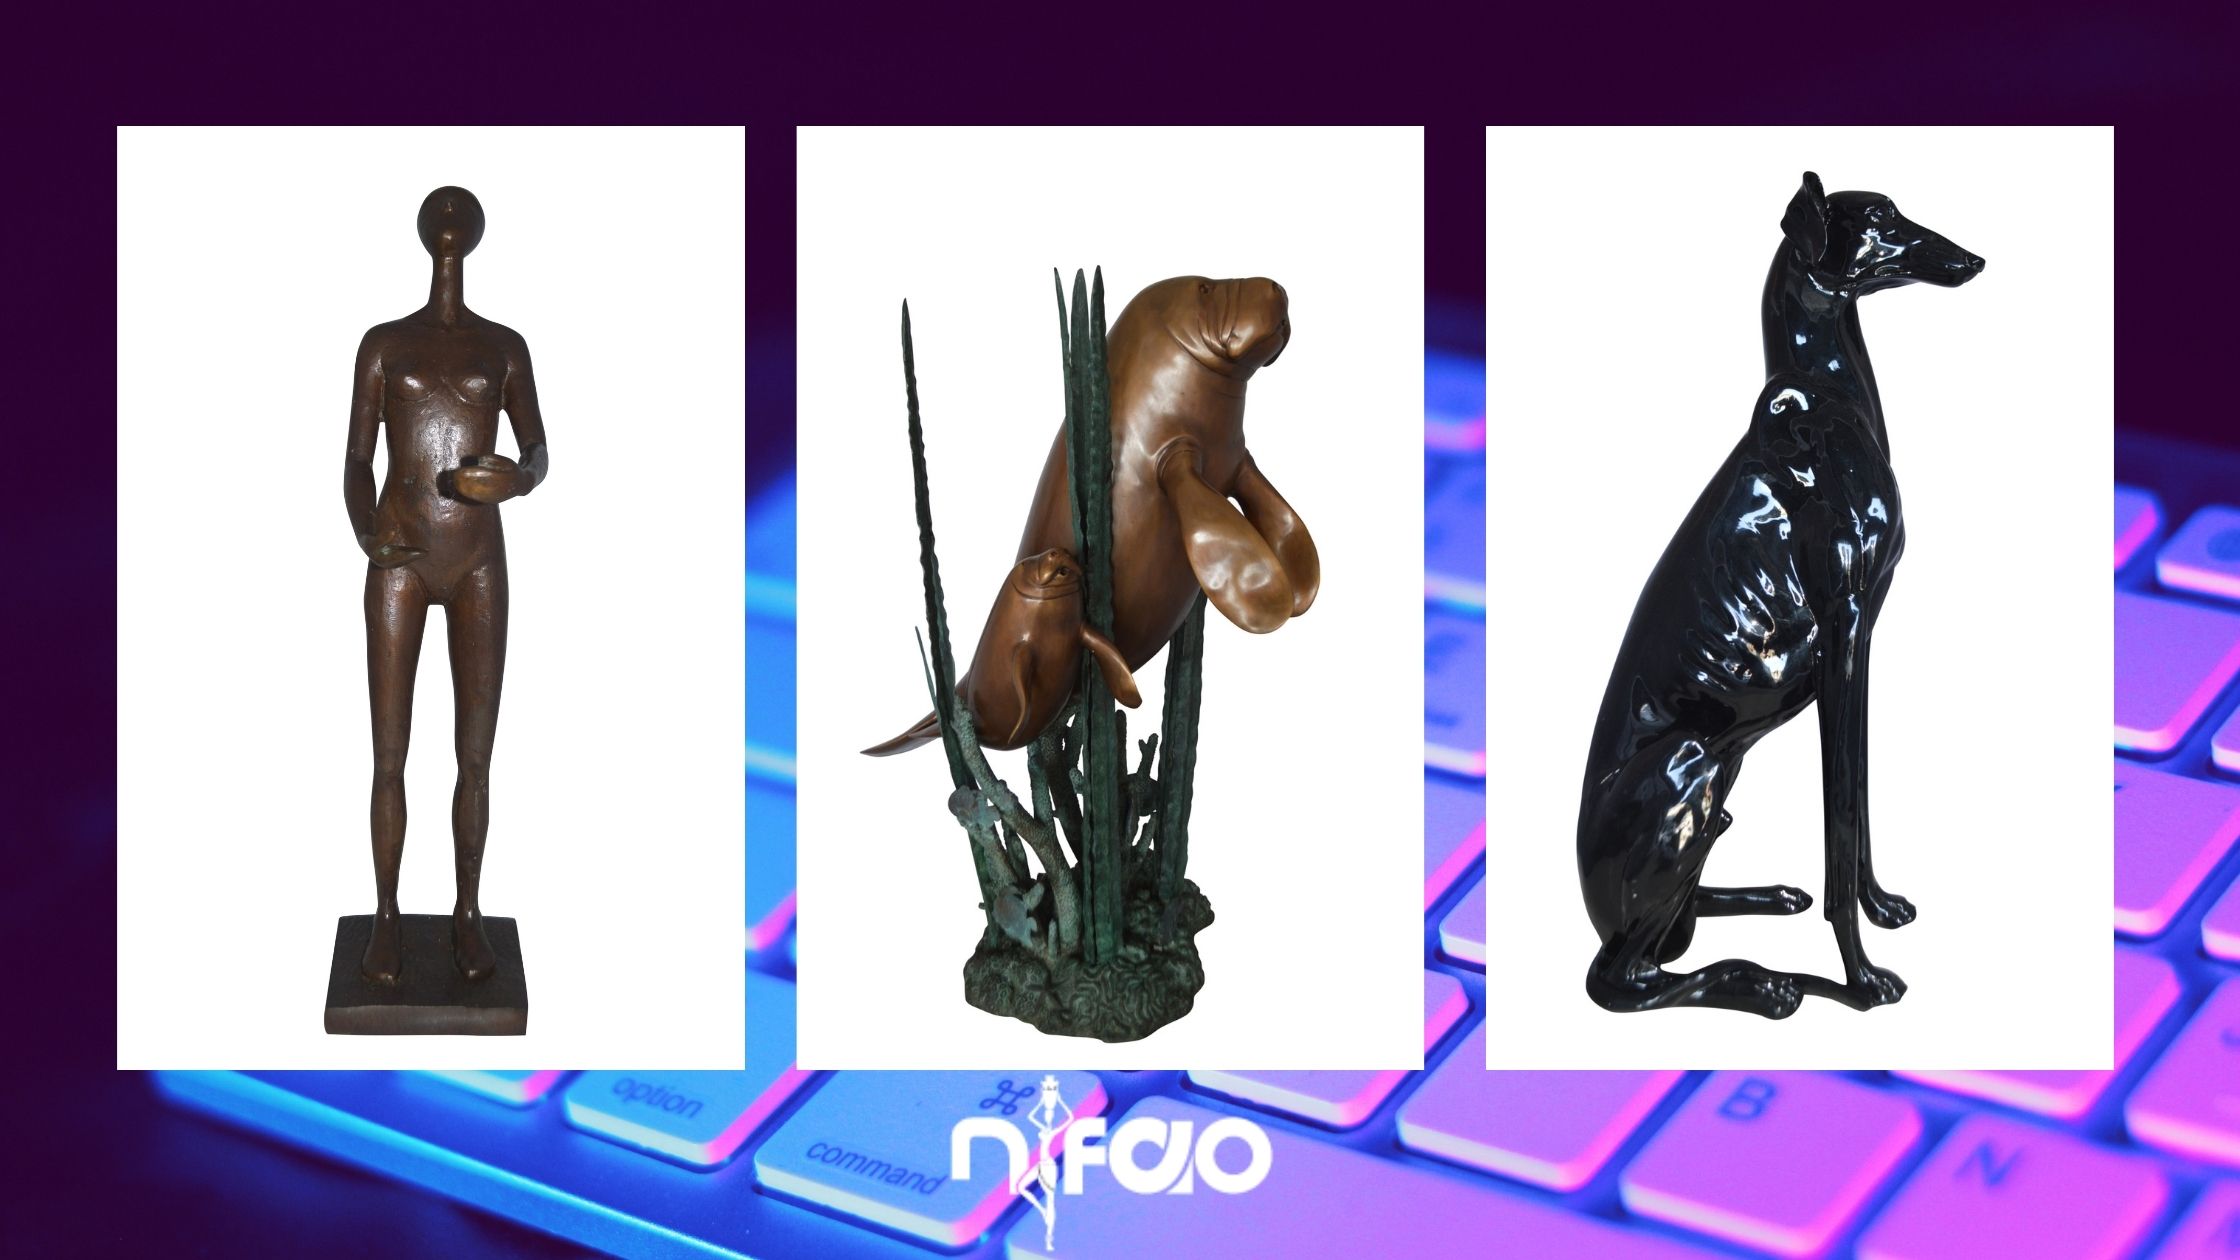 Nifao.Com – The Best Art Shop to Find Bronze Statues And More